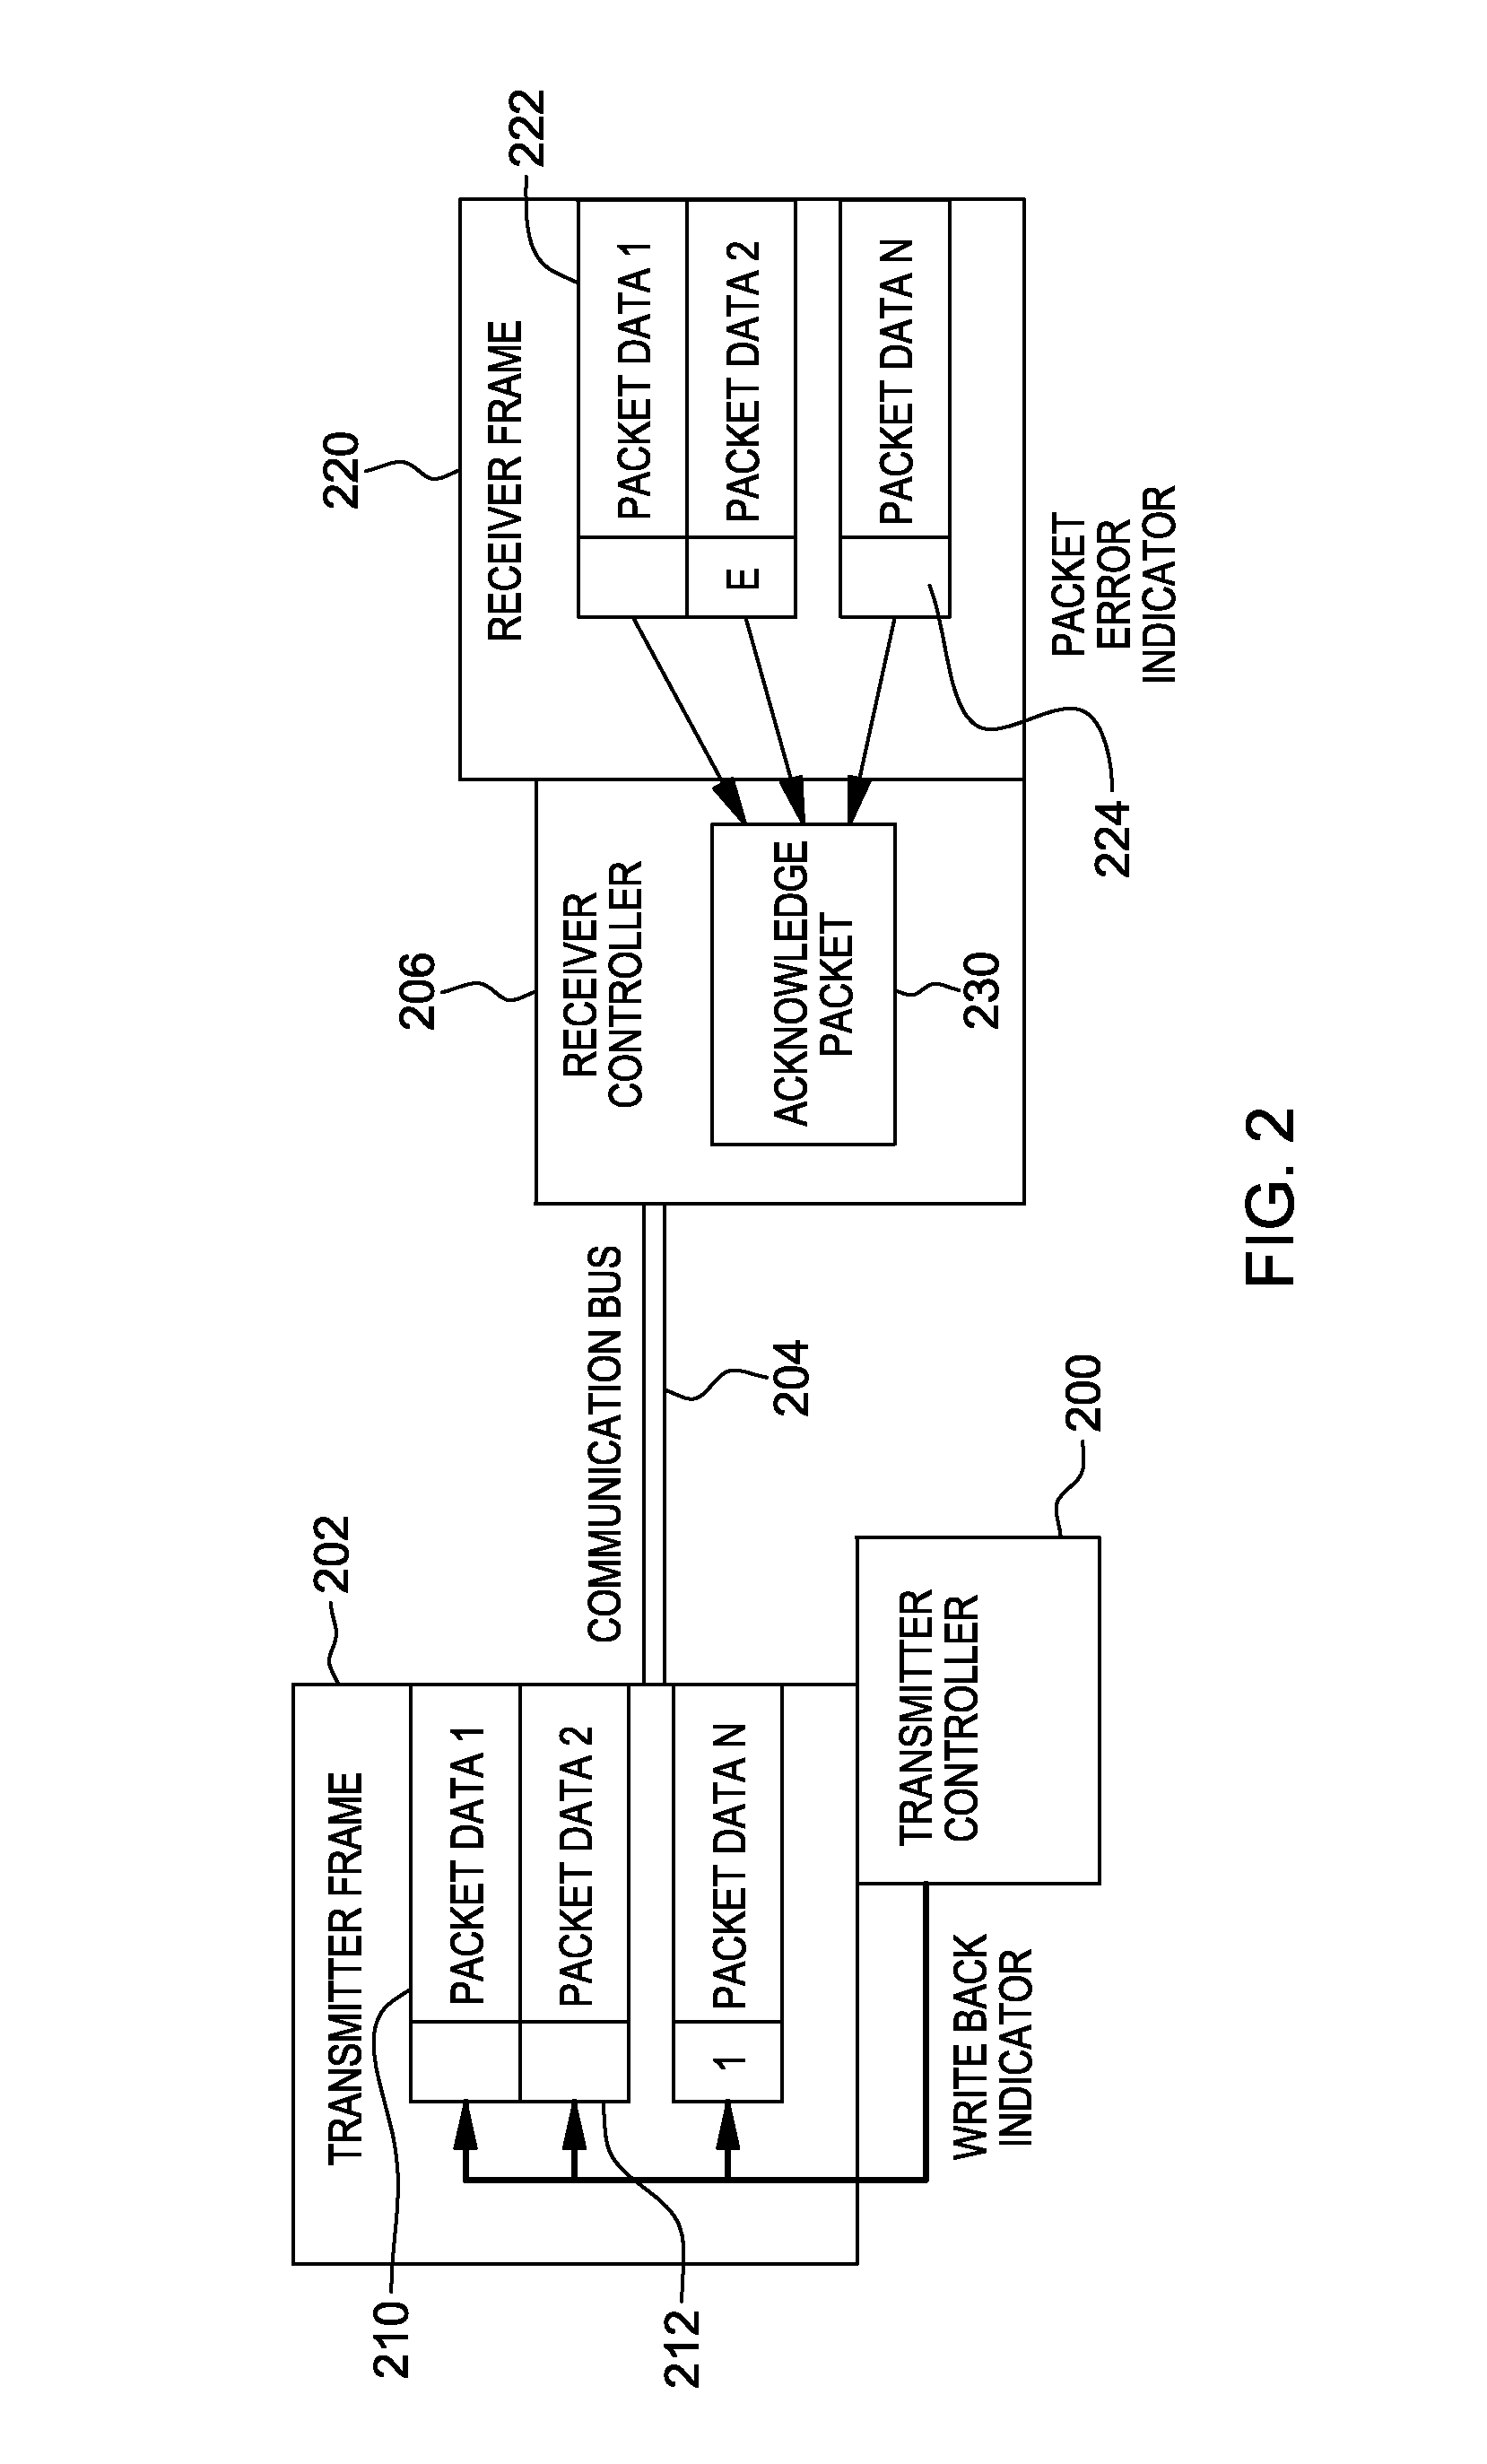 Variable acknowledge rate to reduce bus contention in presence of communication errors